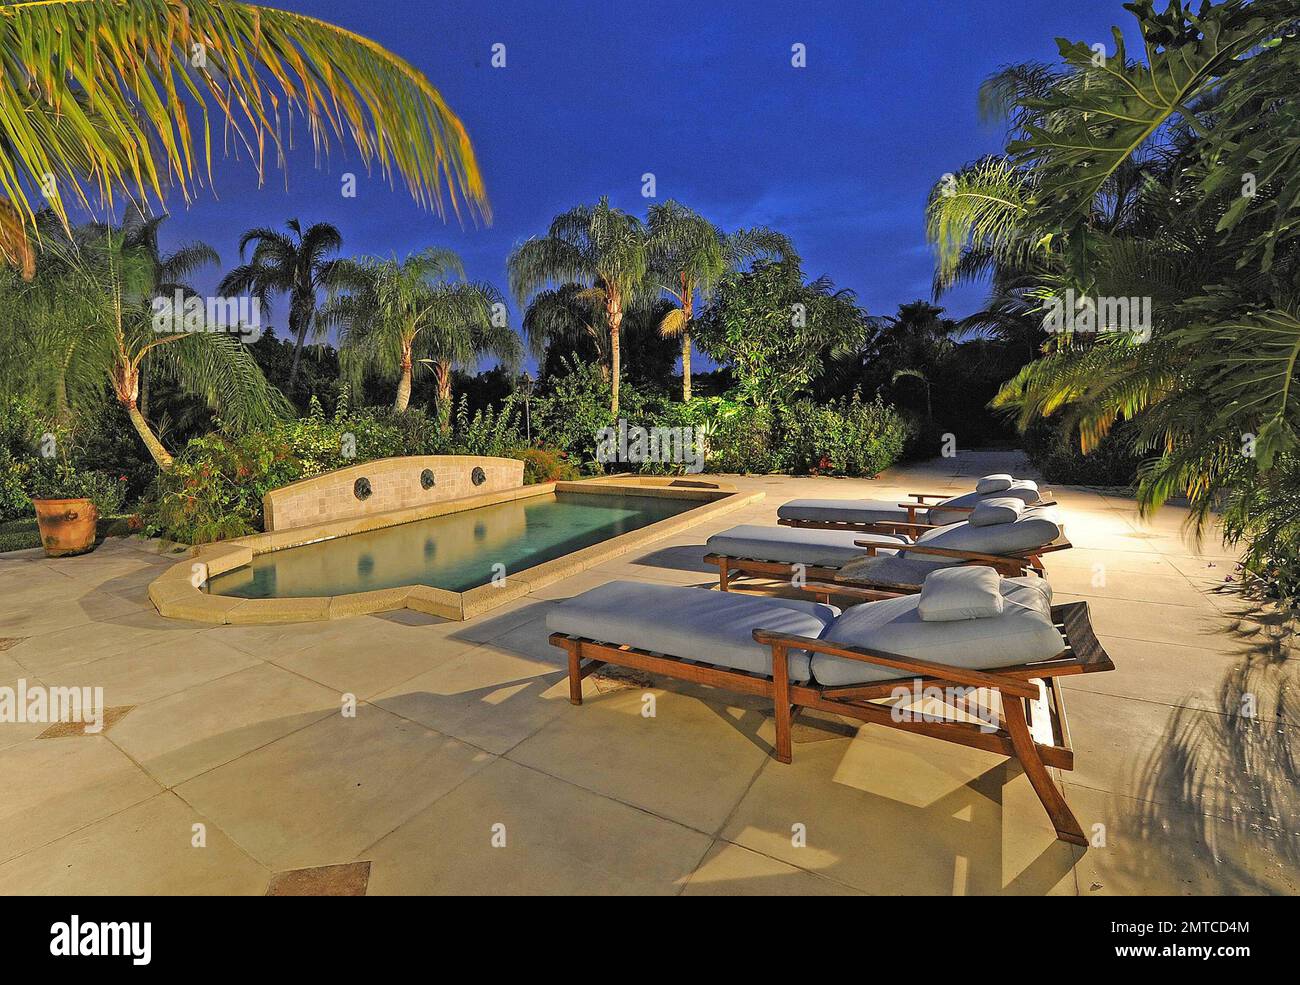 EXCLUSIVE!! Pop star Madonna is reportedly very close to purchasing an $11.9 million Tuscan-style Florida mansion.  According to reports the price of the Wellington home is down from its original listing of $13 million.  The eight-bedroom, 10,000-square-foot luxury property is situated on almost five acres of manicured, palm tree-lined land and is conveniently located beside an equestrian club.  The home also features a backyard pool and lounge area, vast dining and living rooms and horse stables.  Madonna is known to fancy the high-end sport of polo, so much so that she still rides even after Stock Photo